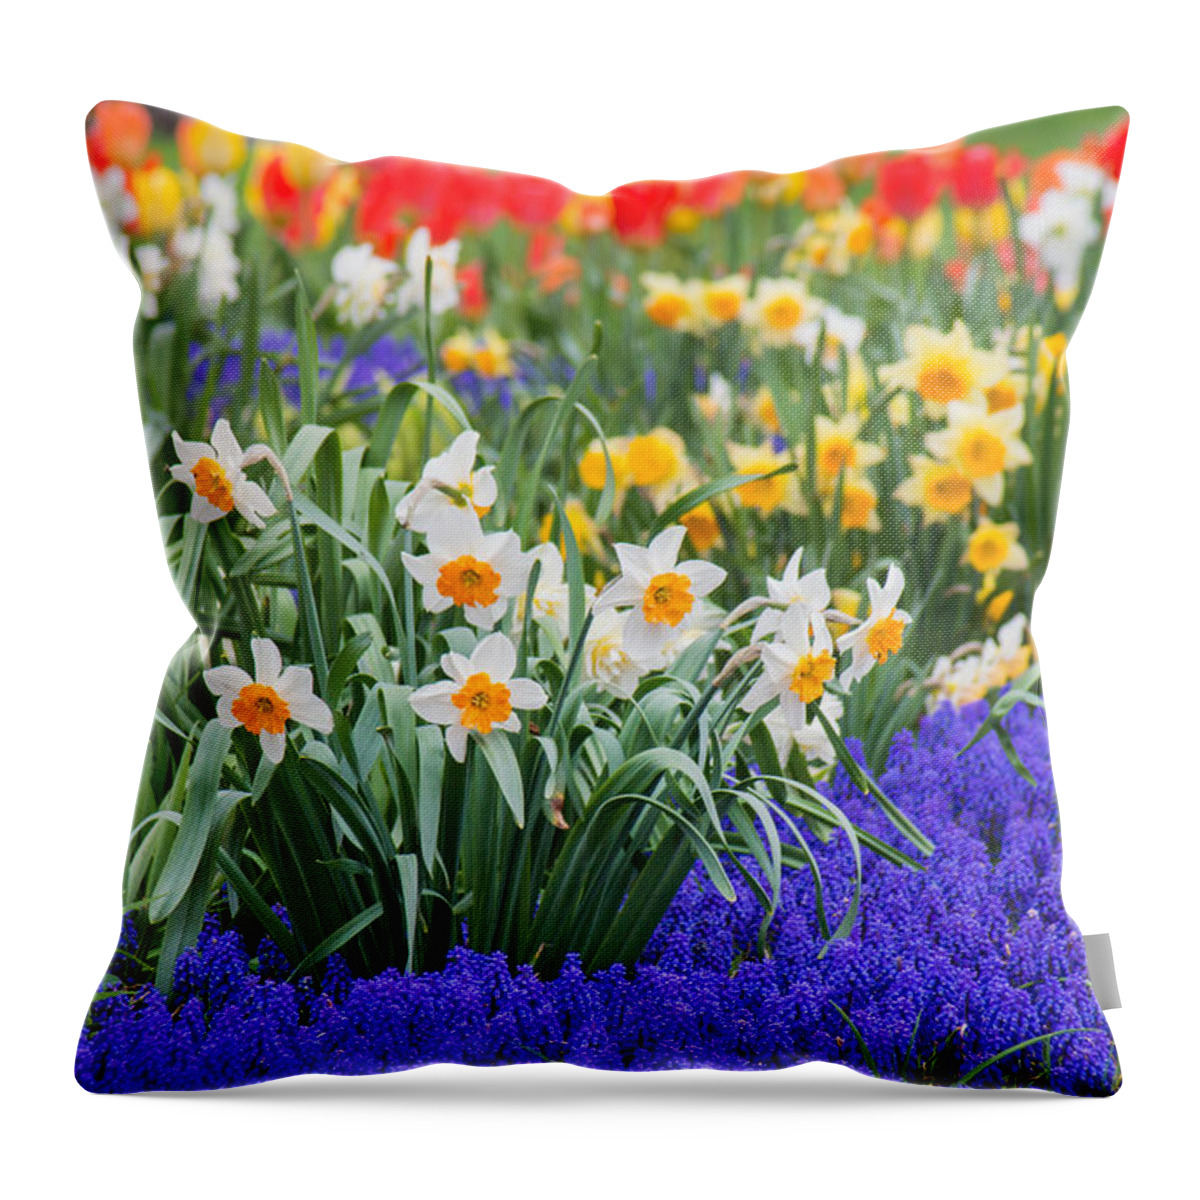 Blue Throw Pillow featuring the photograph Glorious Spring by Bill Pevlor